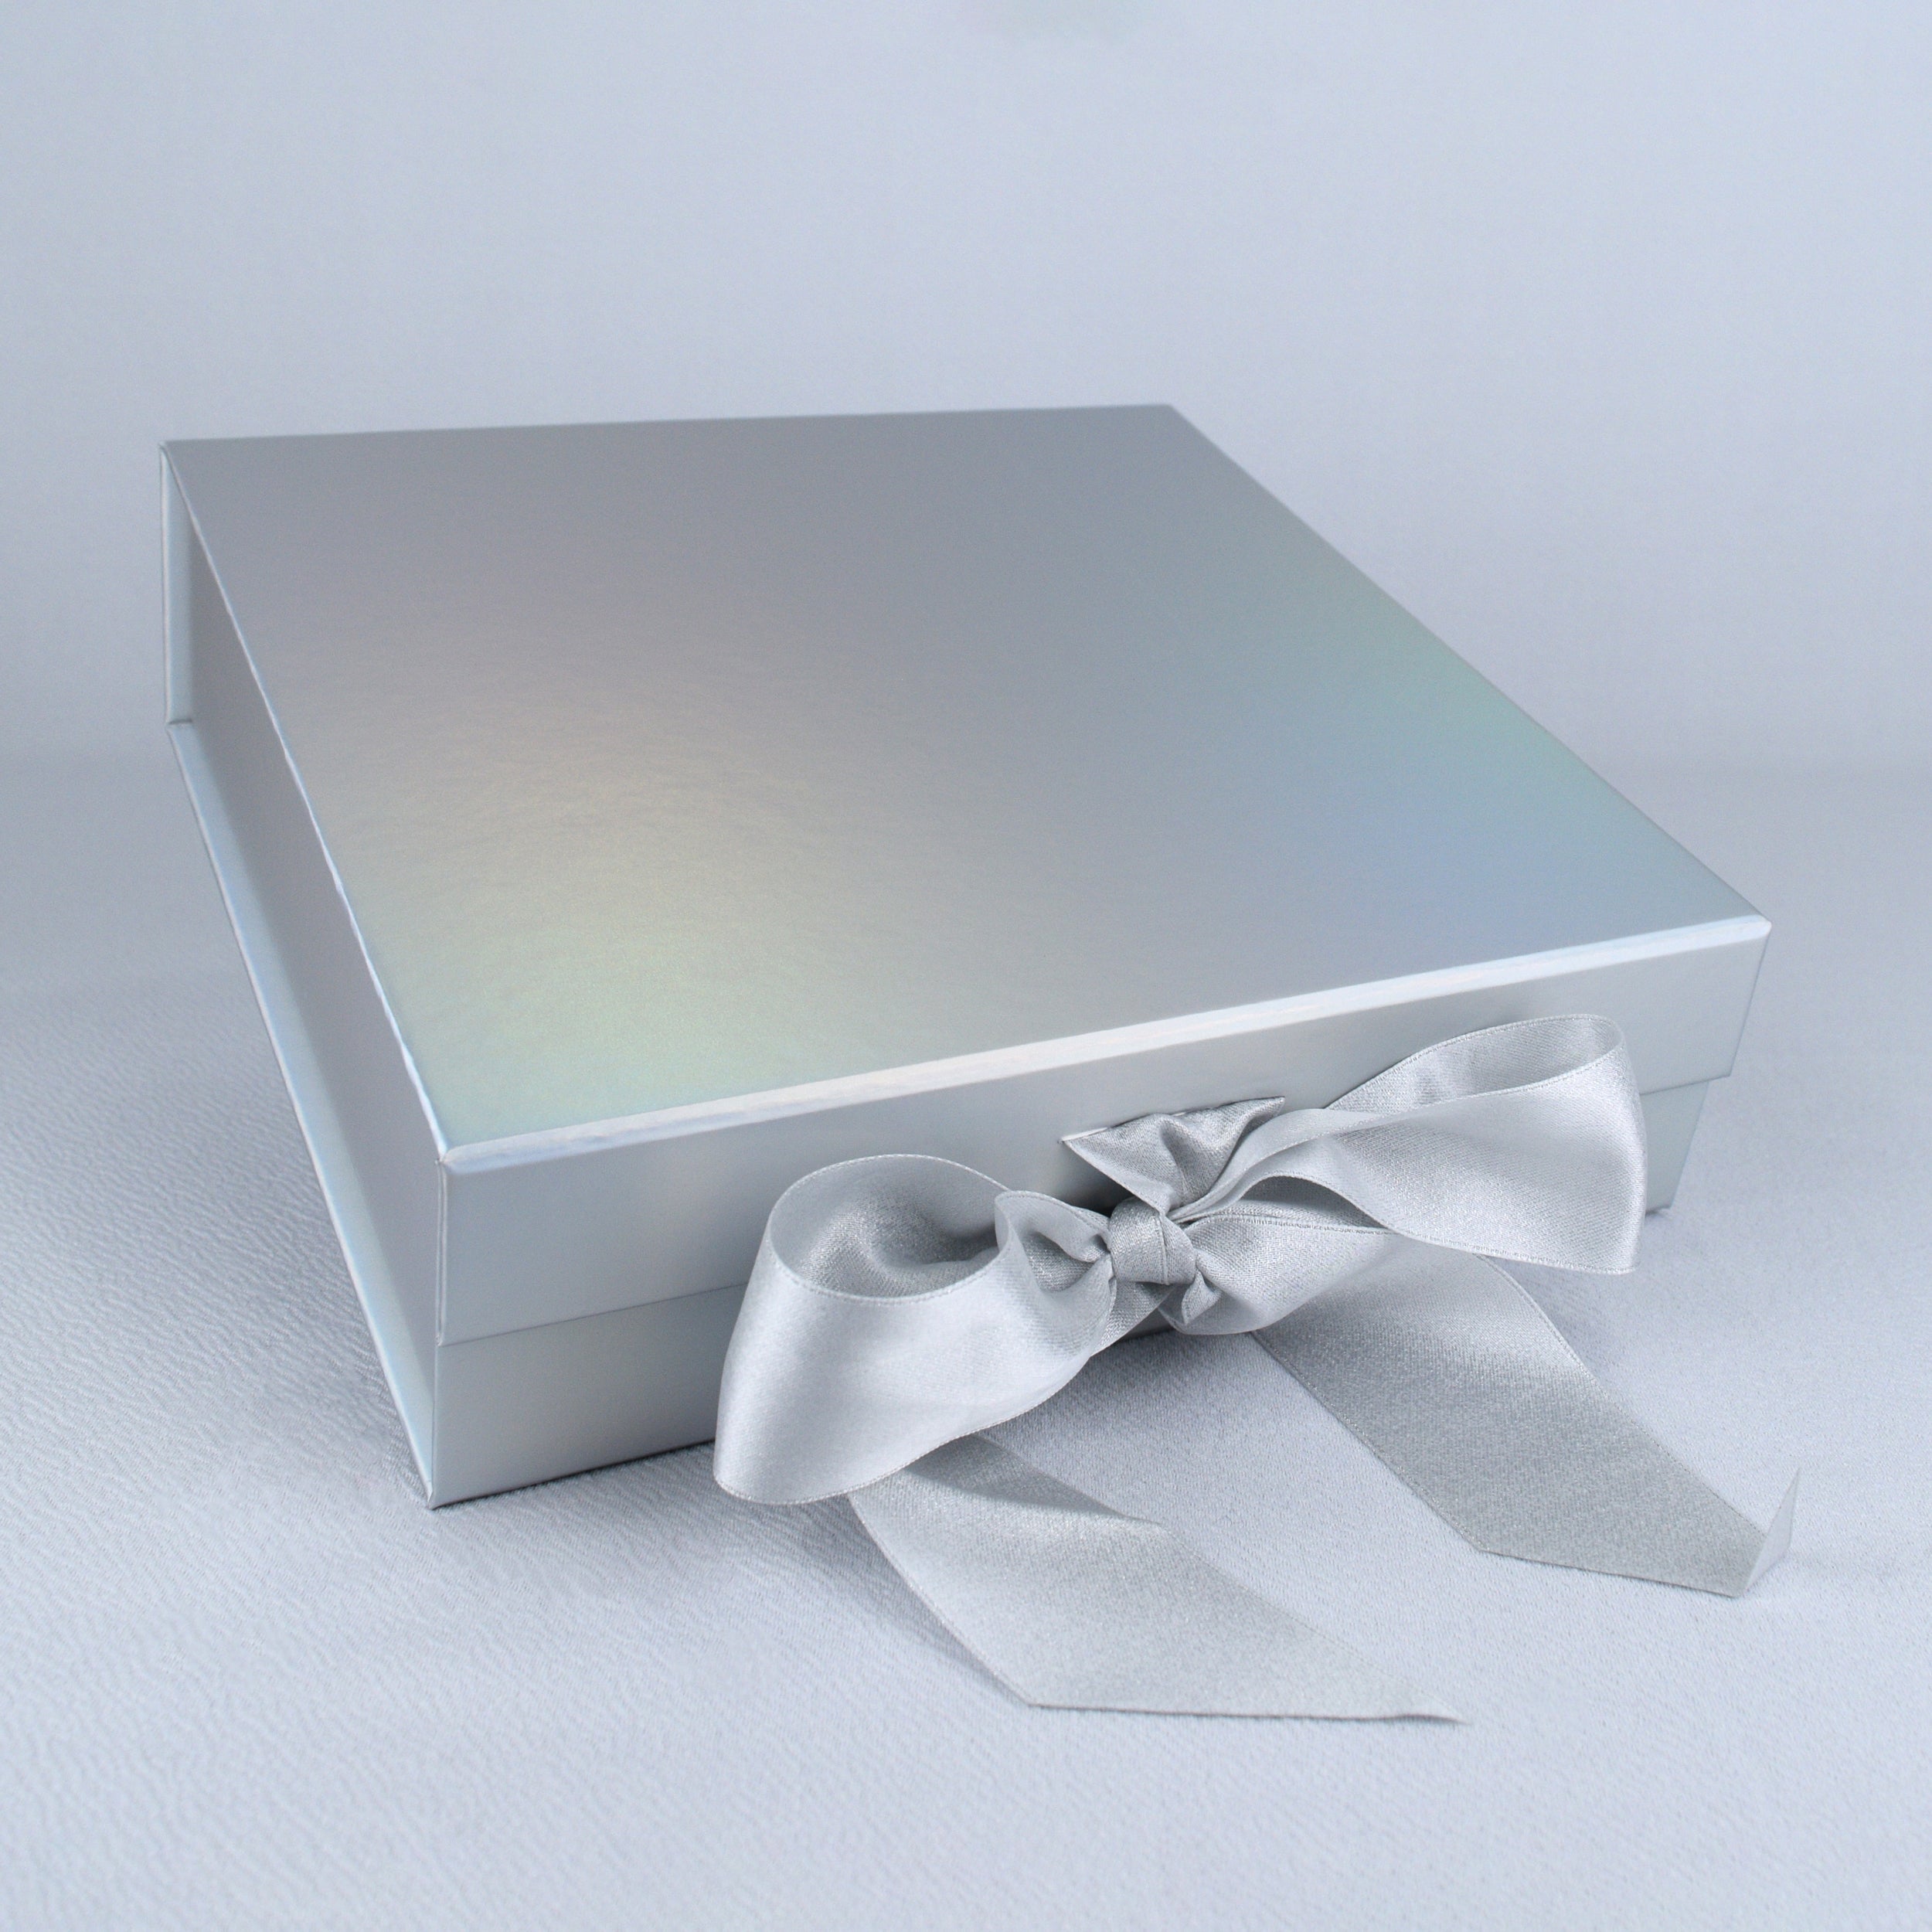 White Magnetic Gift Box with Ribbon Bow - The Little Shop of Boxes Ltd